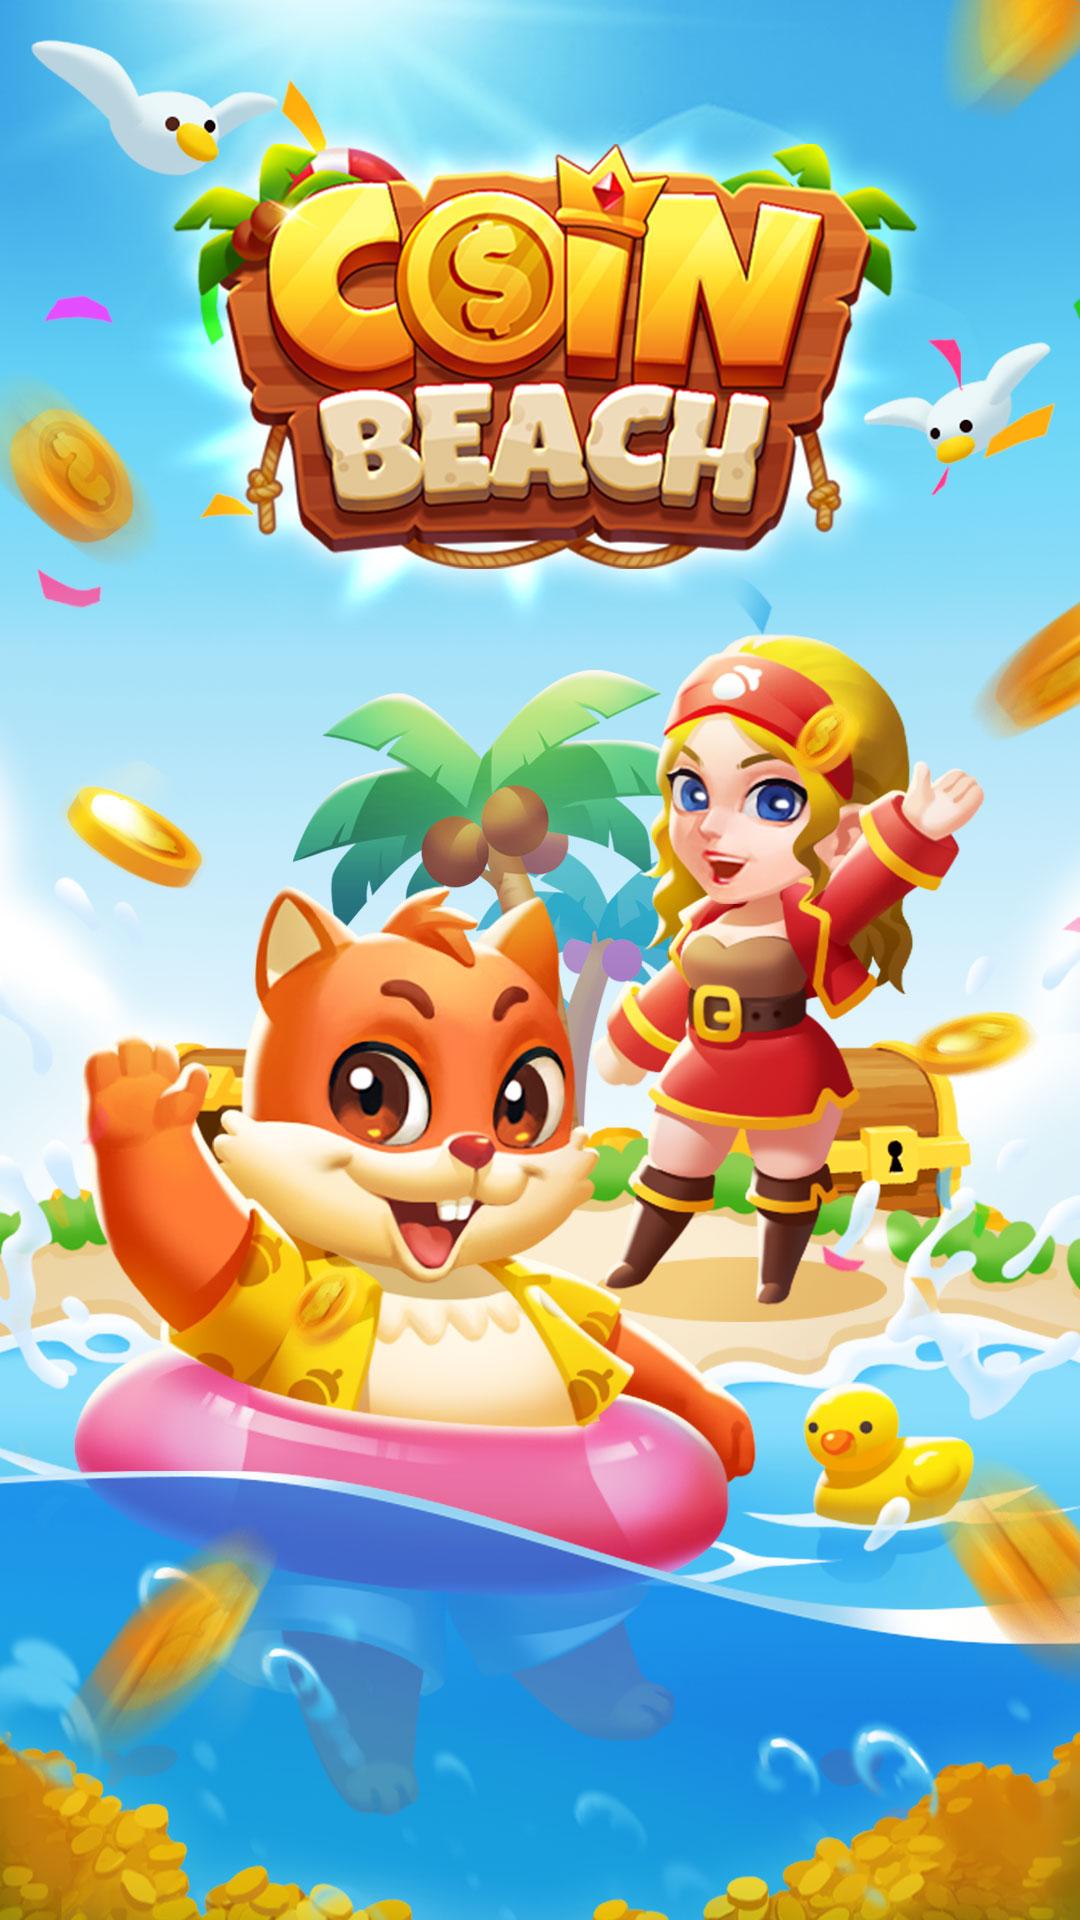 Coin Beach for Android - APK Download